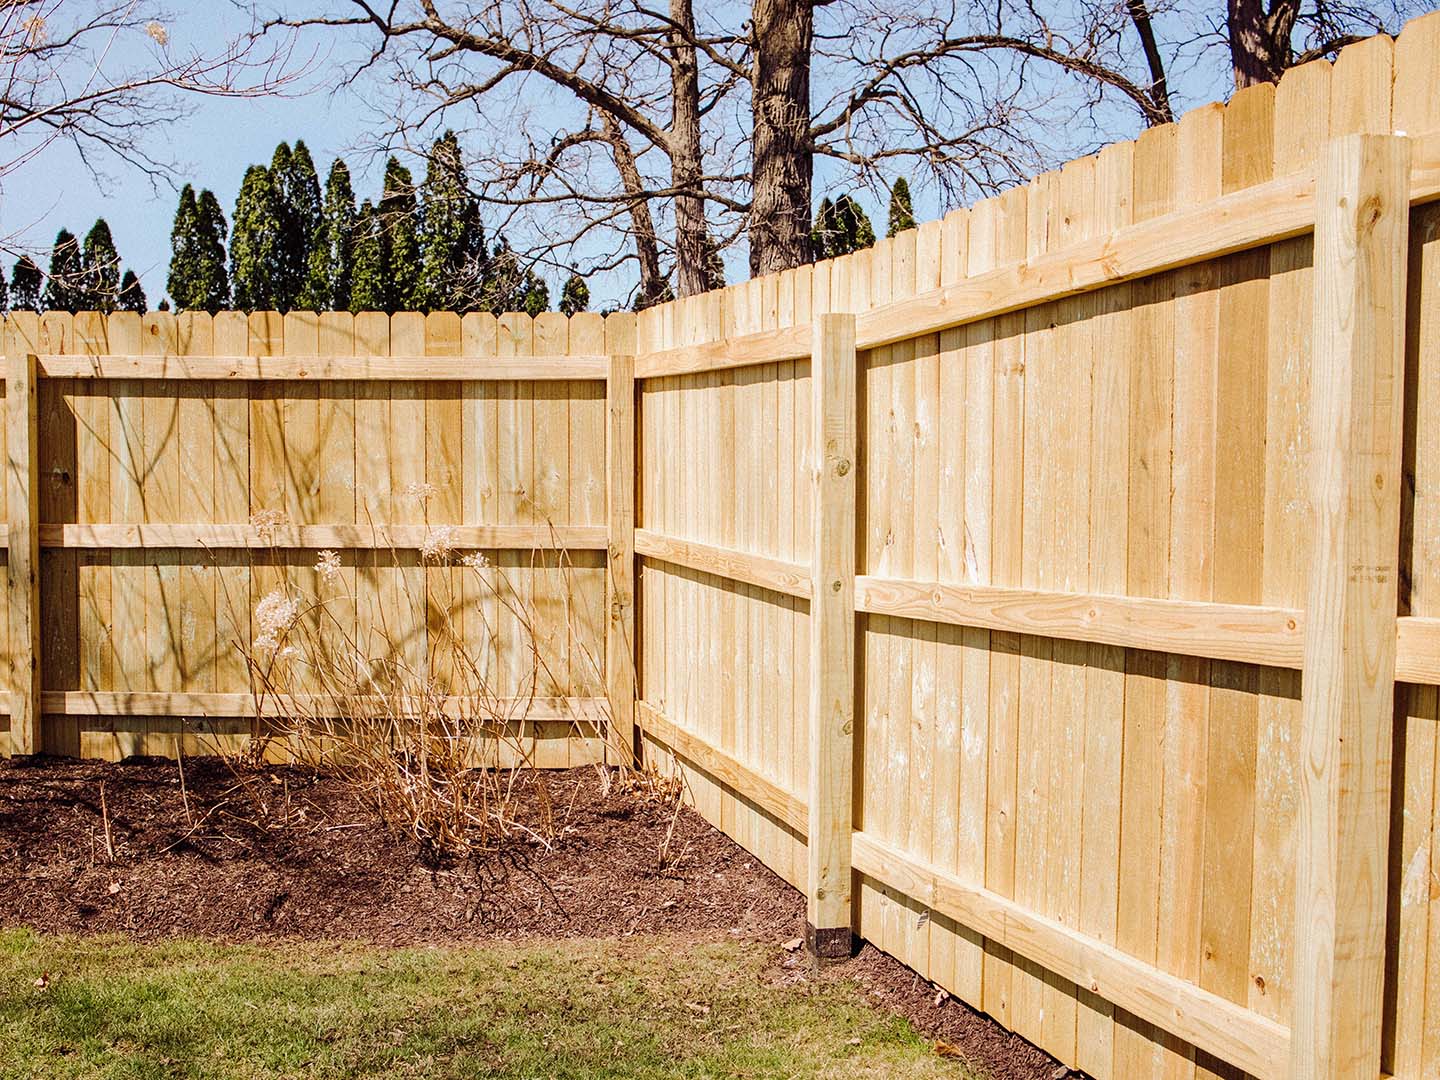 Kouts Indiana wood privacy fencing